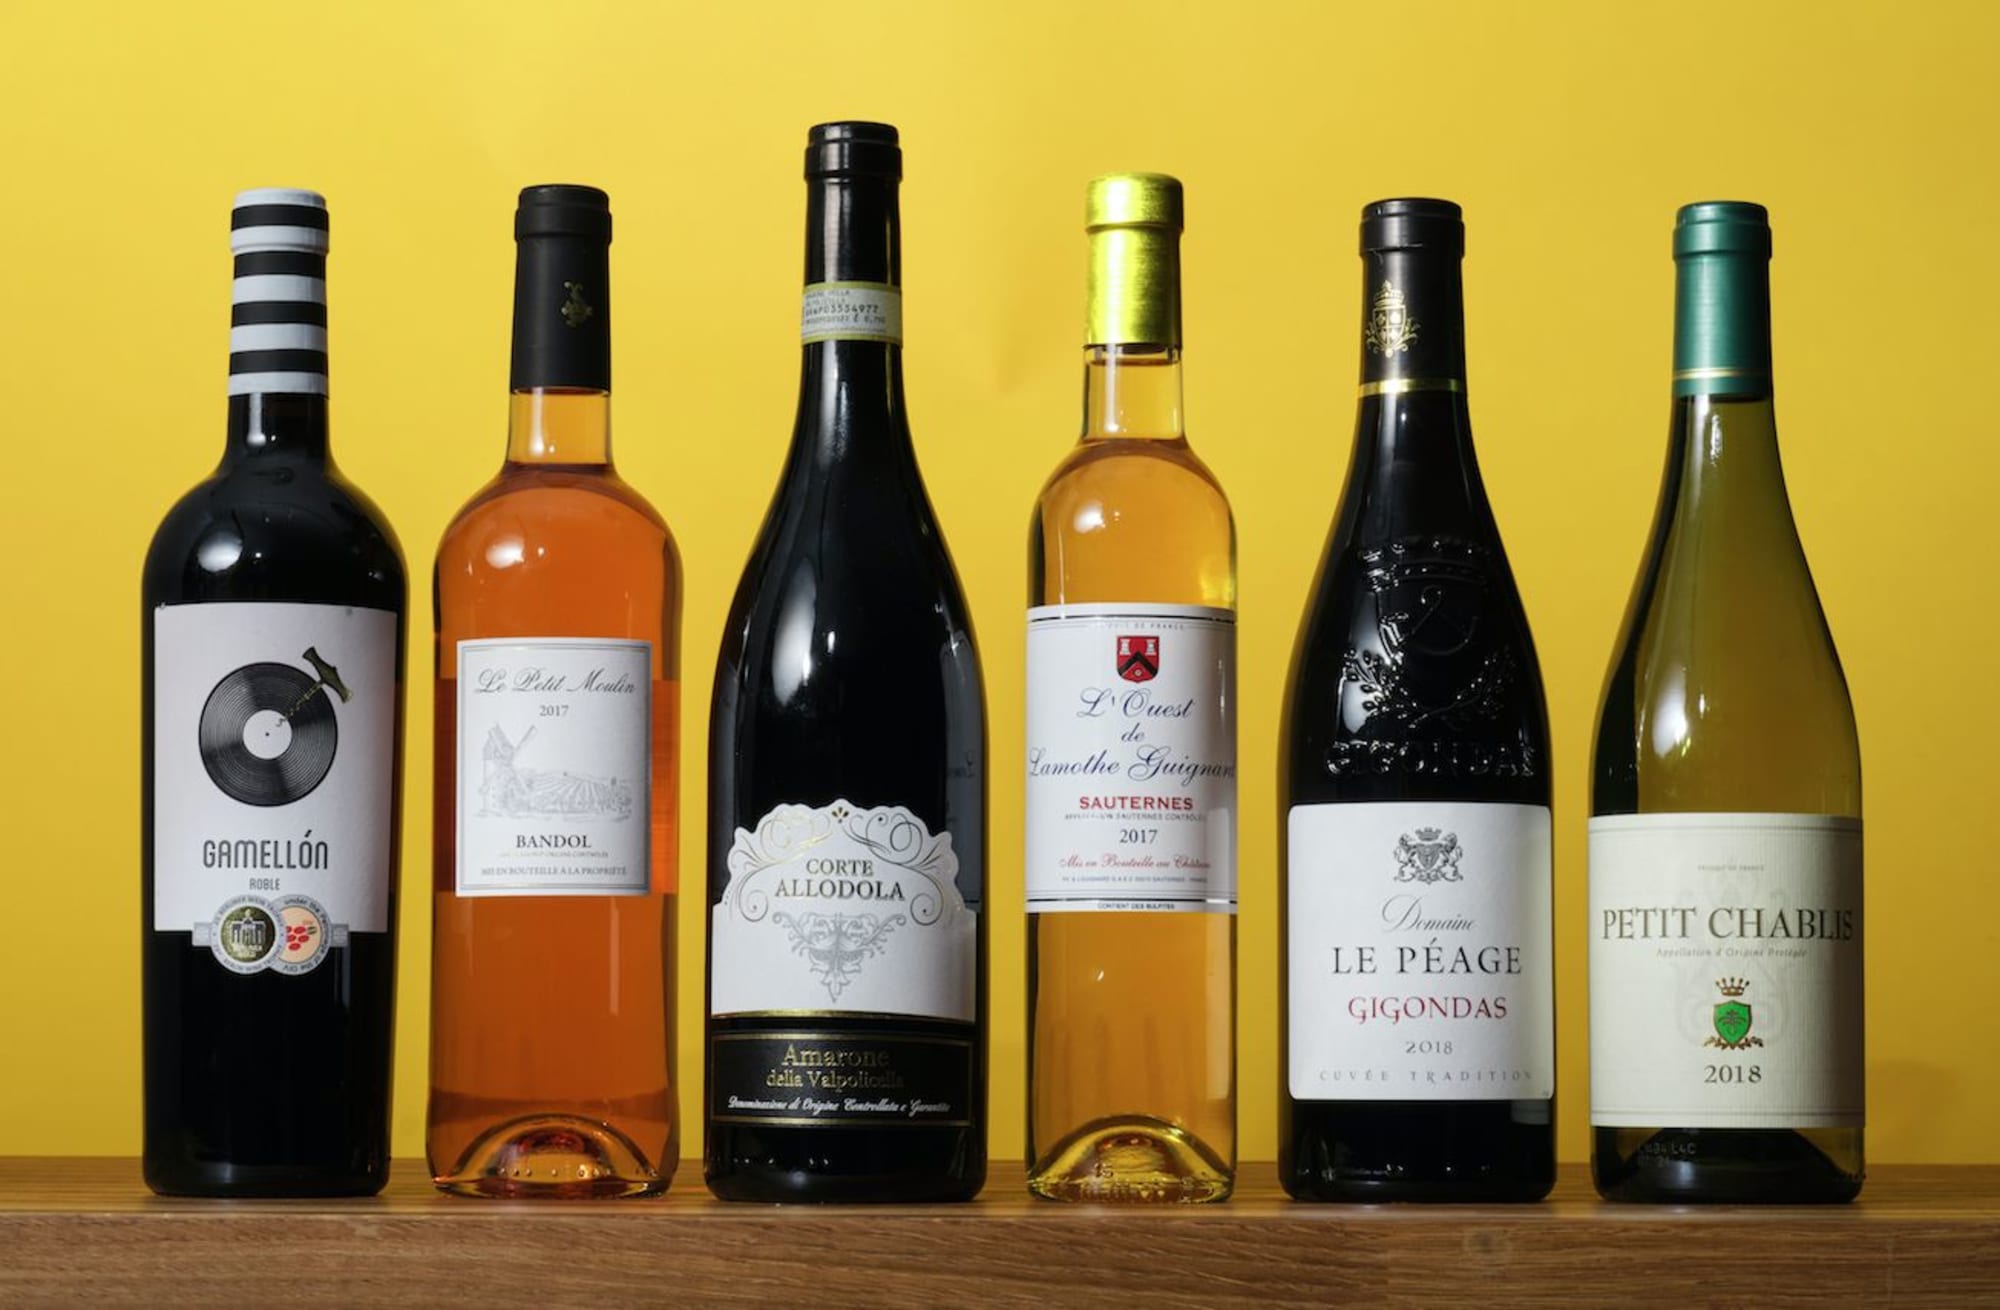 Spring has sprung, top Spring wines under 20 from Lidl